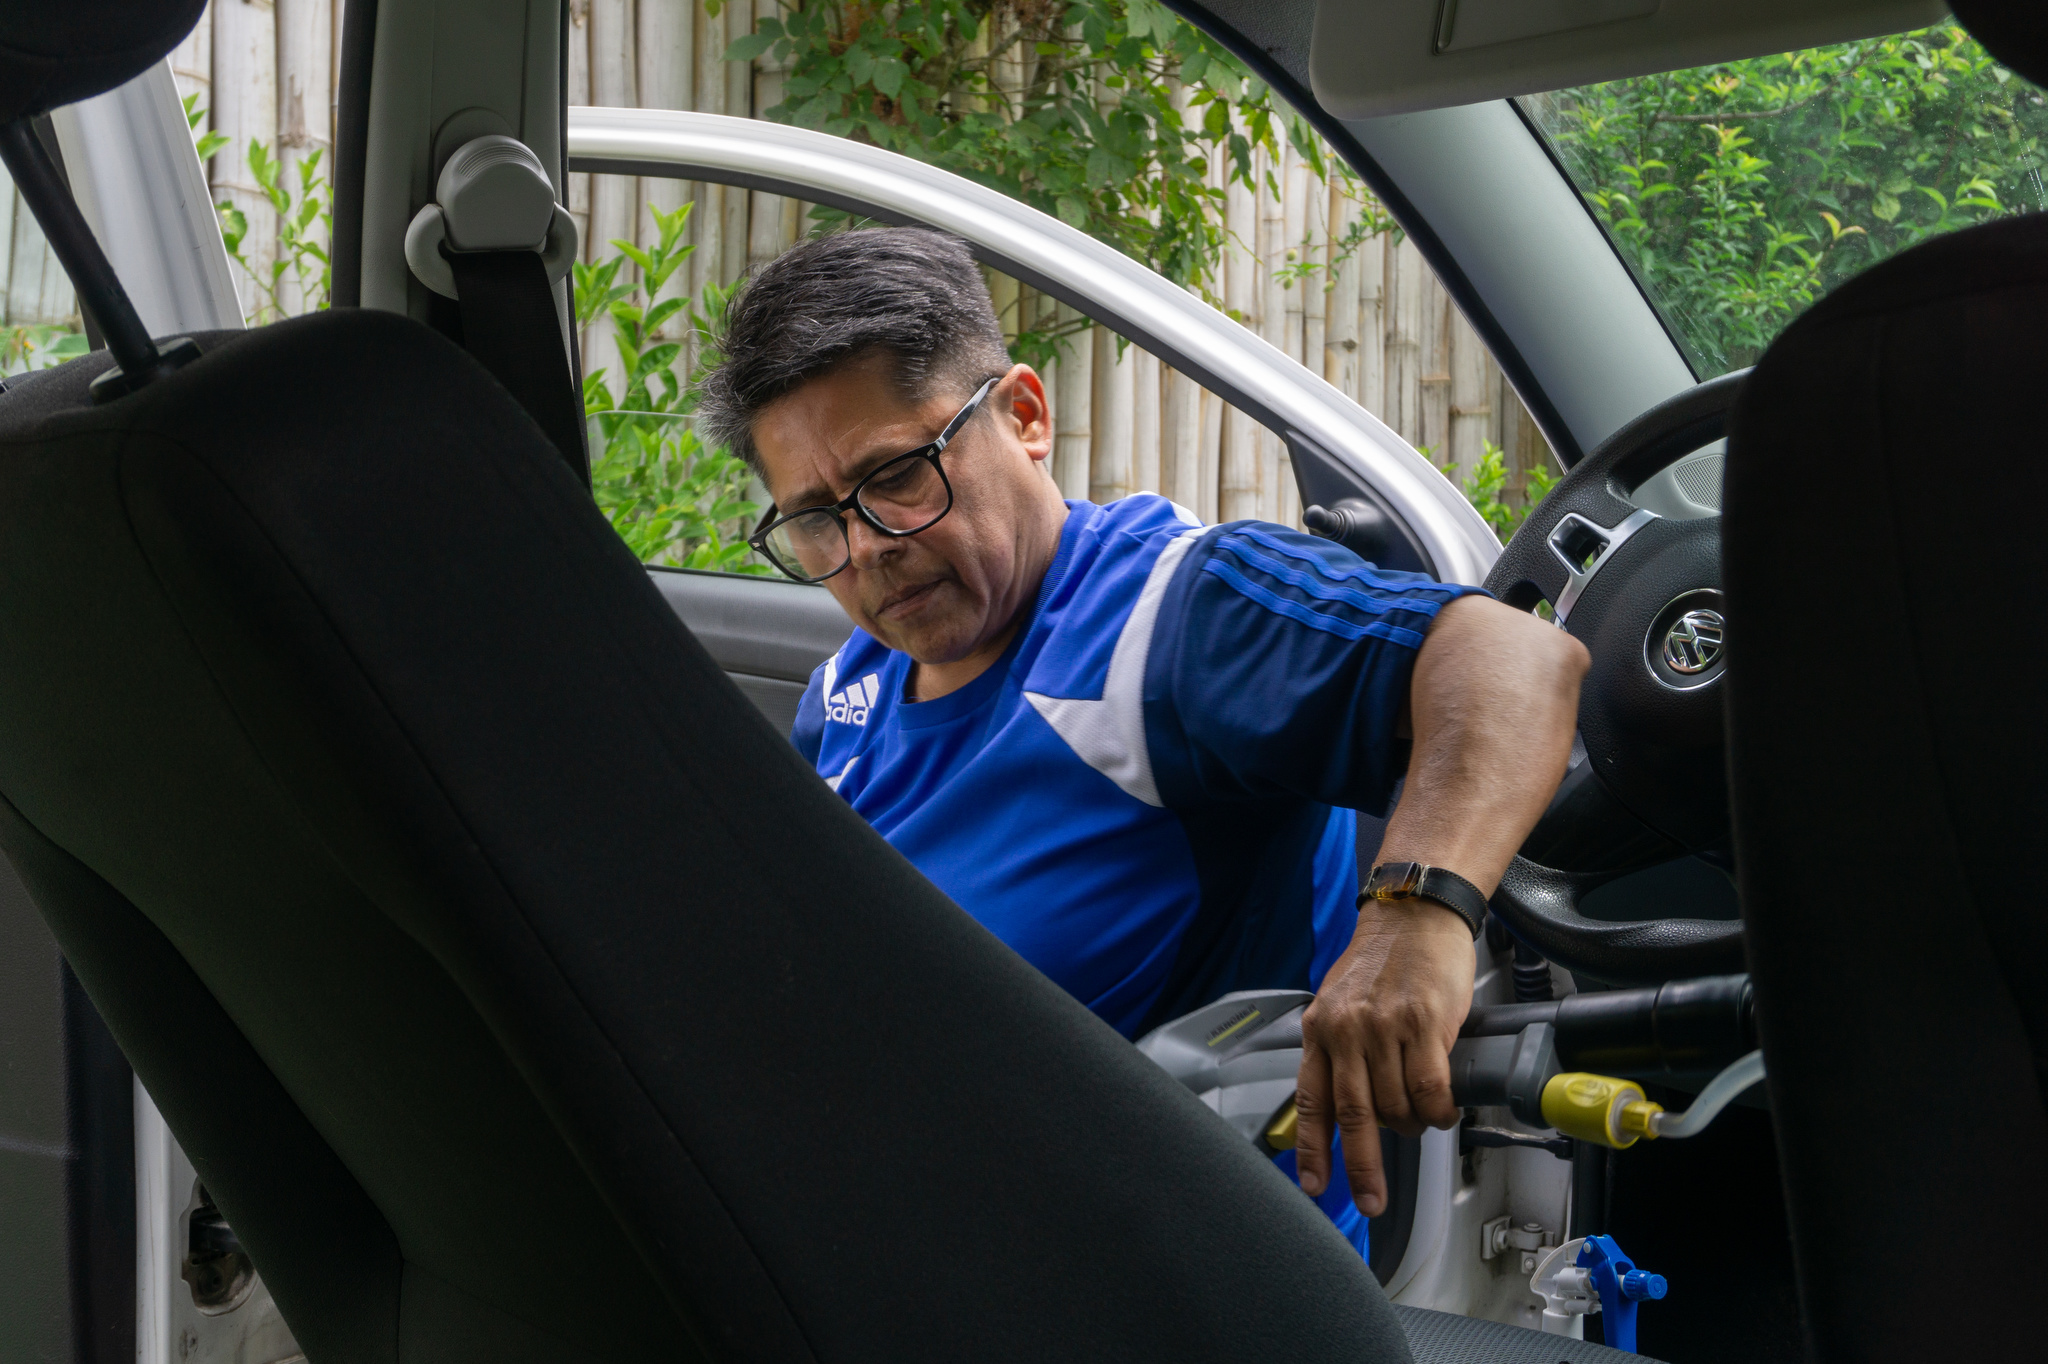 A Mexican person with graying hair works on the interior of a car. He can be seen from the waist up, wearing a blue Adidas shirt.